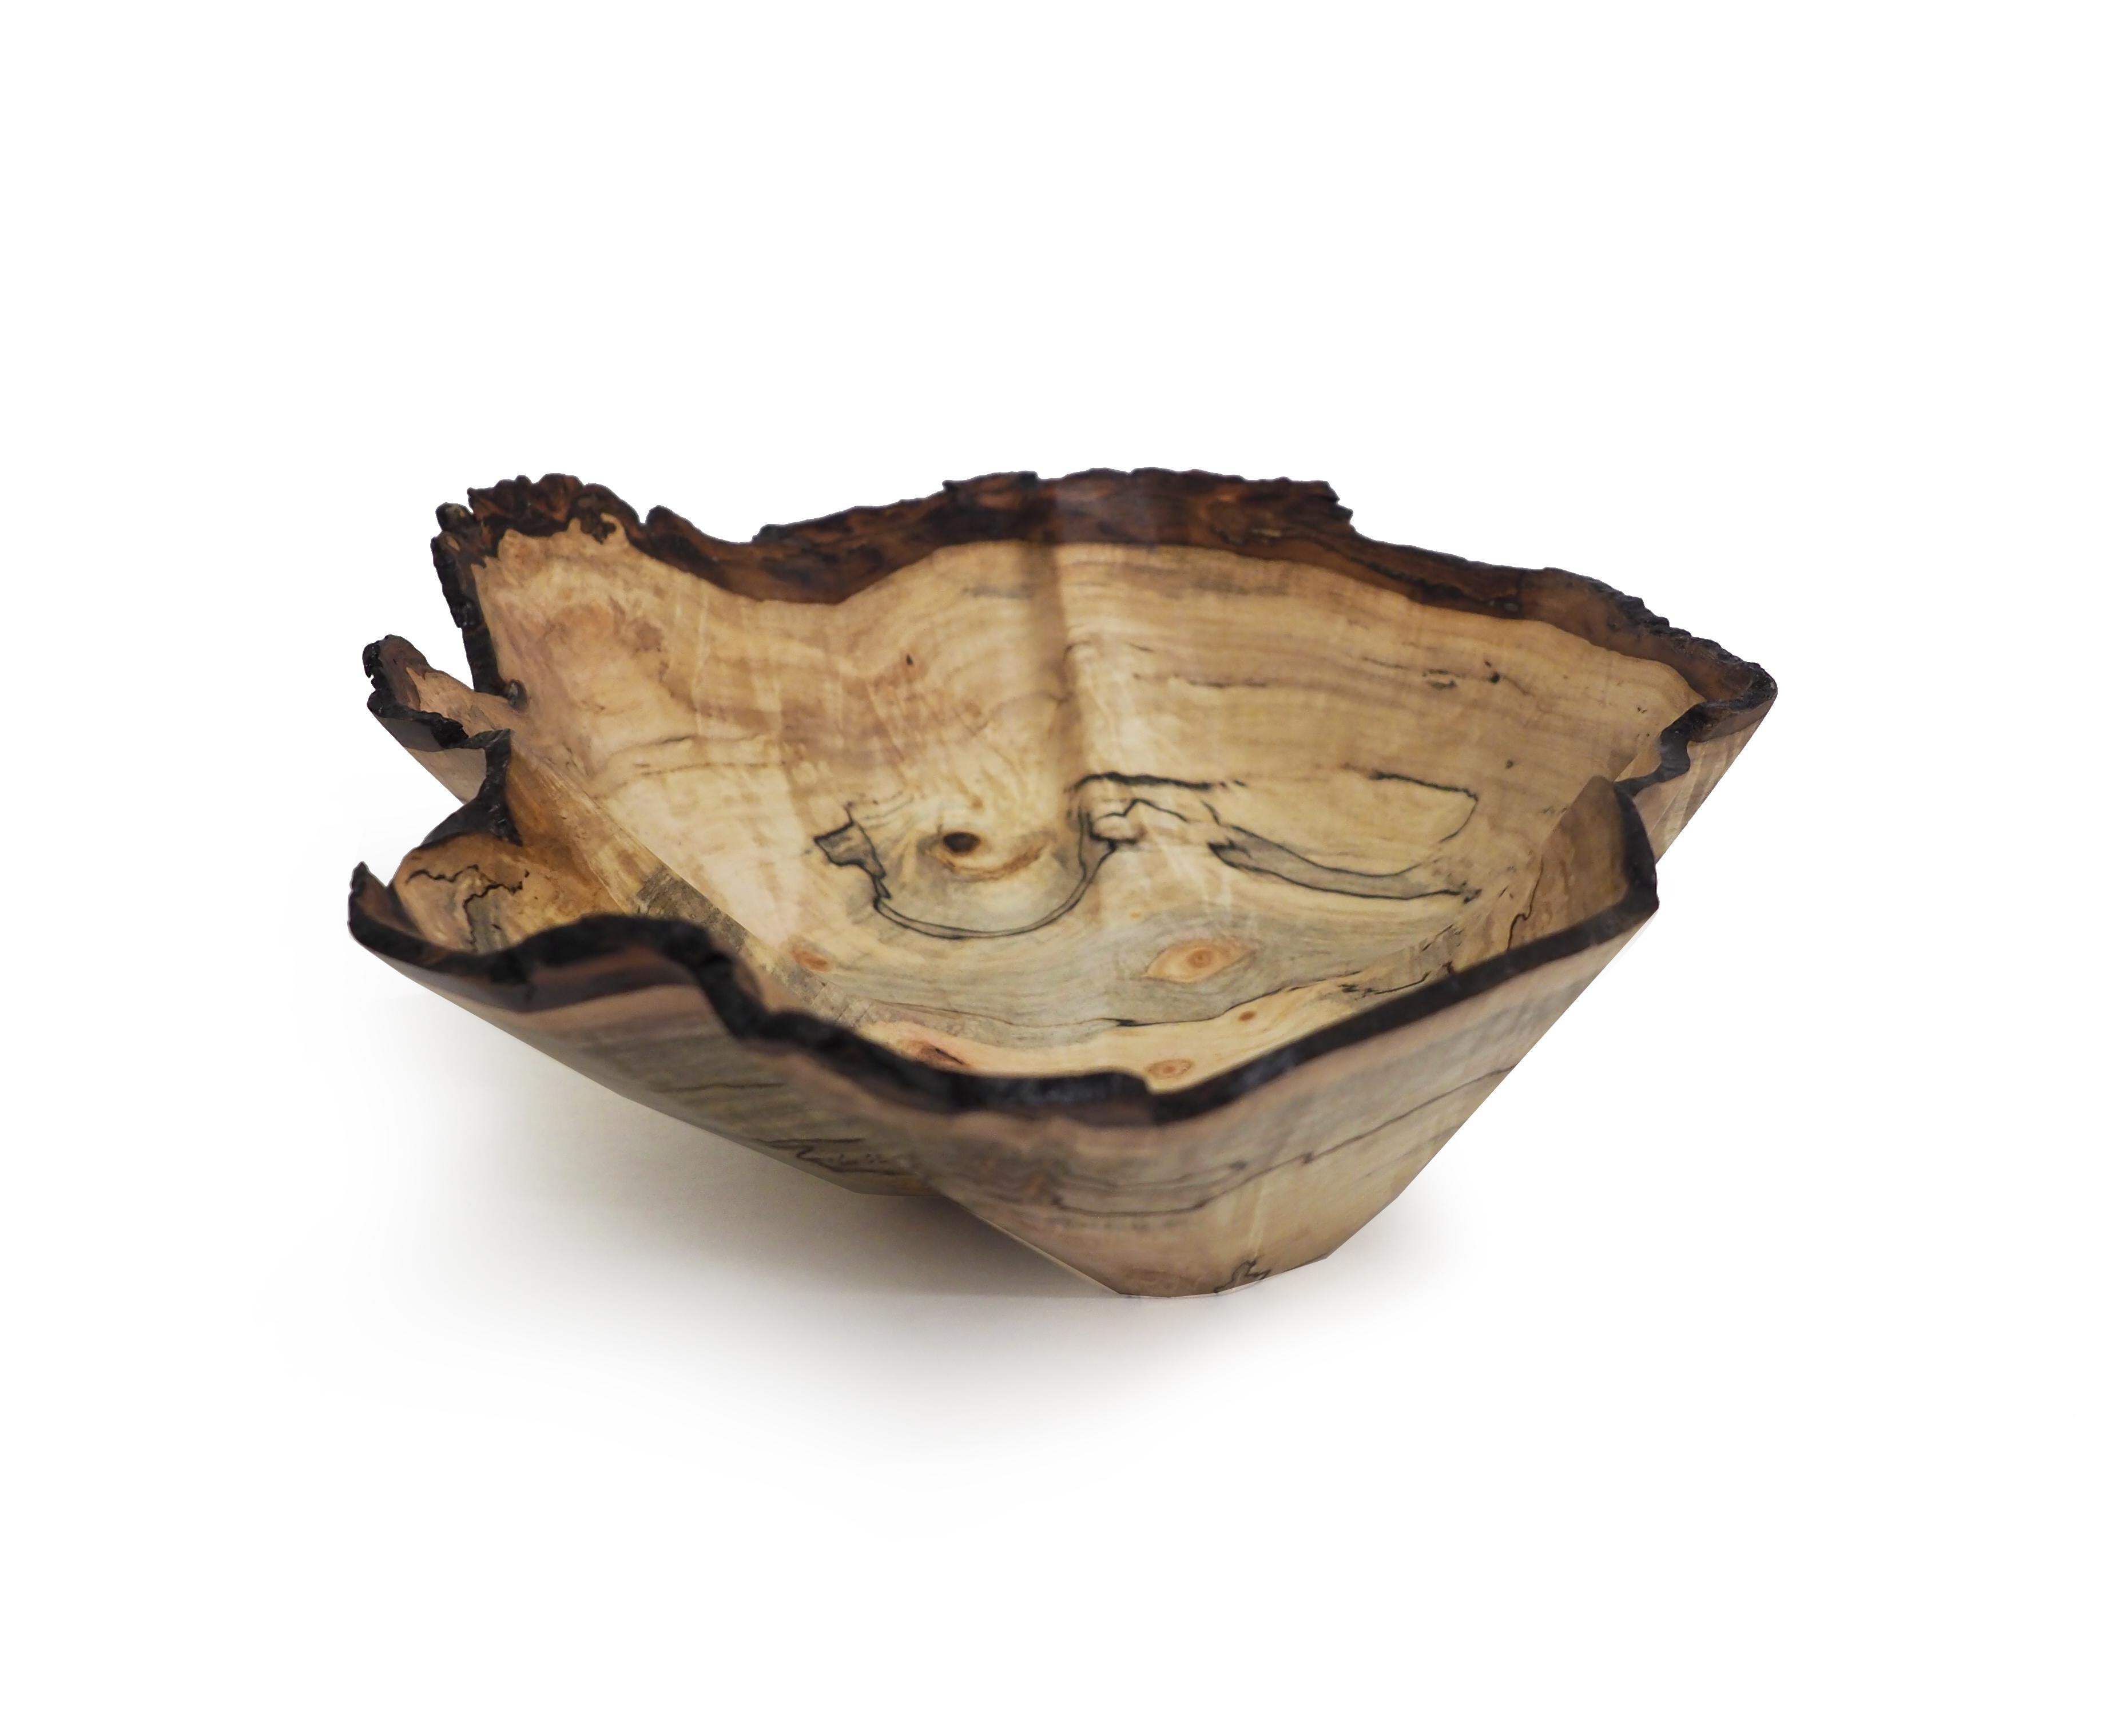 Dogwood Blossom by Brad Sells is a beautiful sculpture crafted from maple burl. 